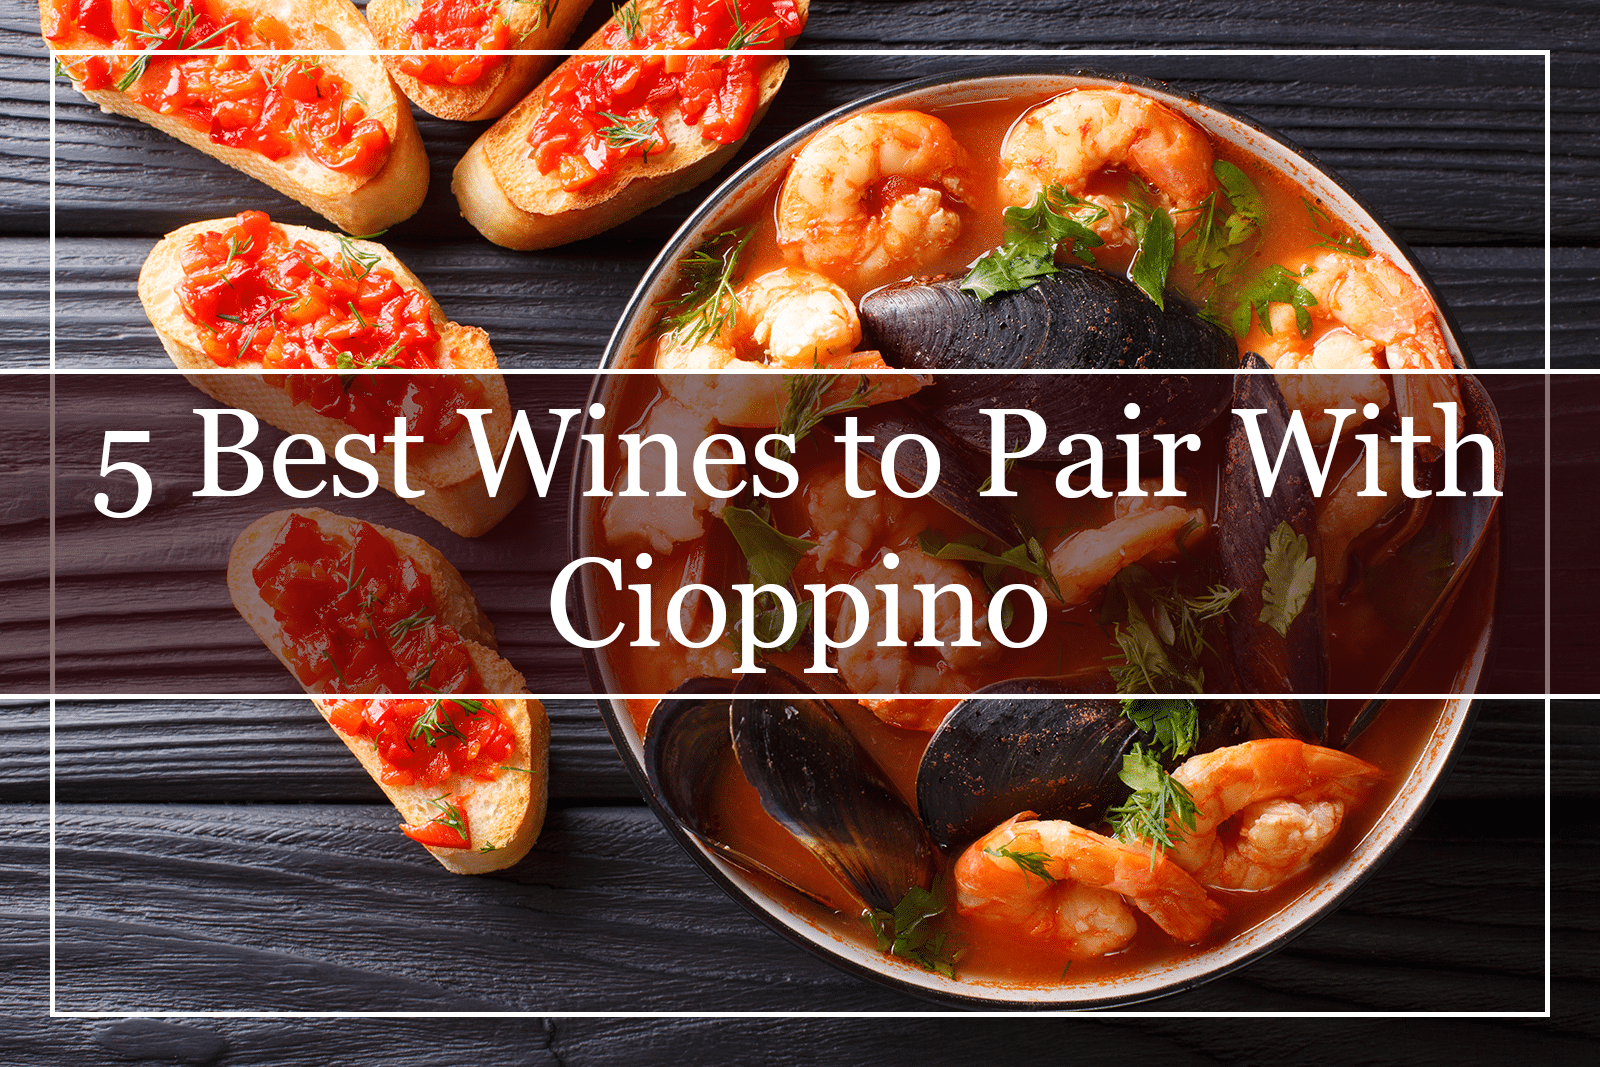 5 Best Wines to Pair With Cioppino (2022)